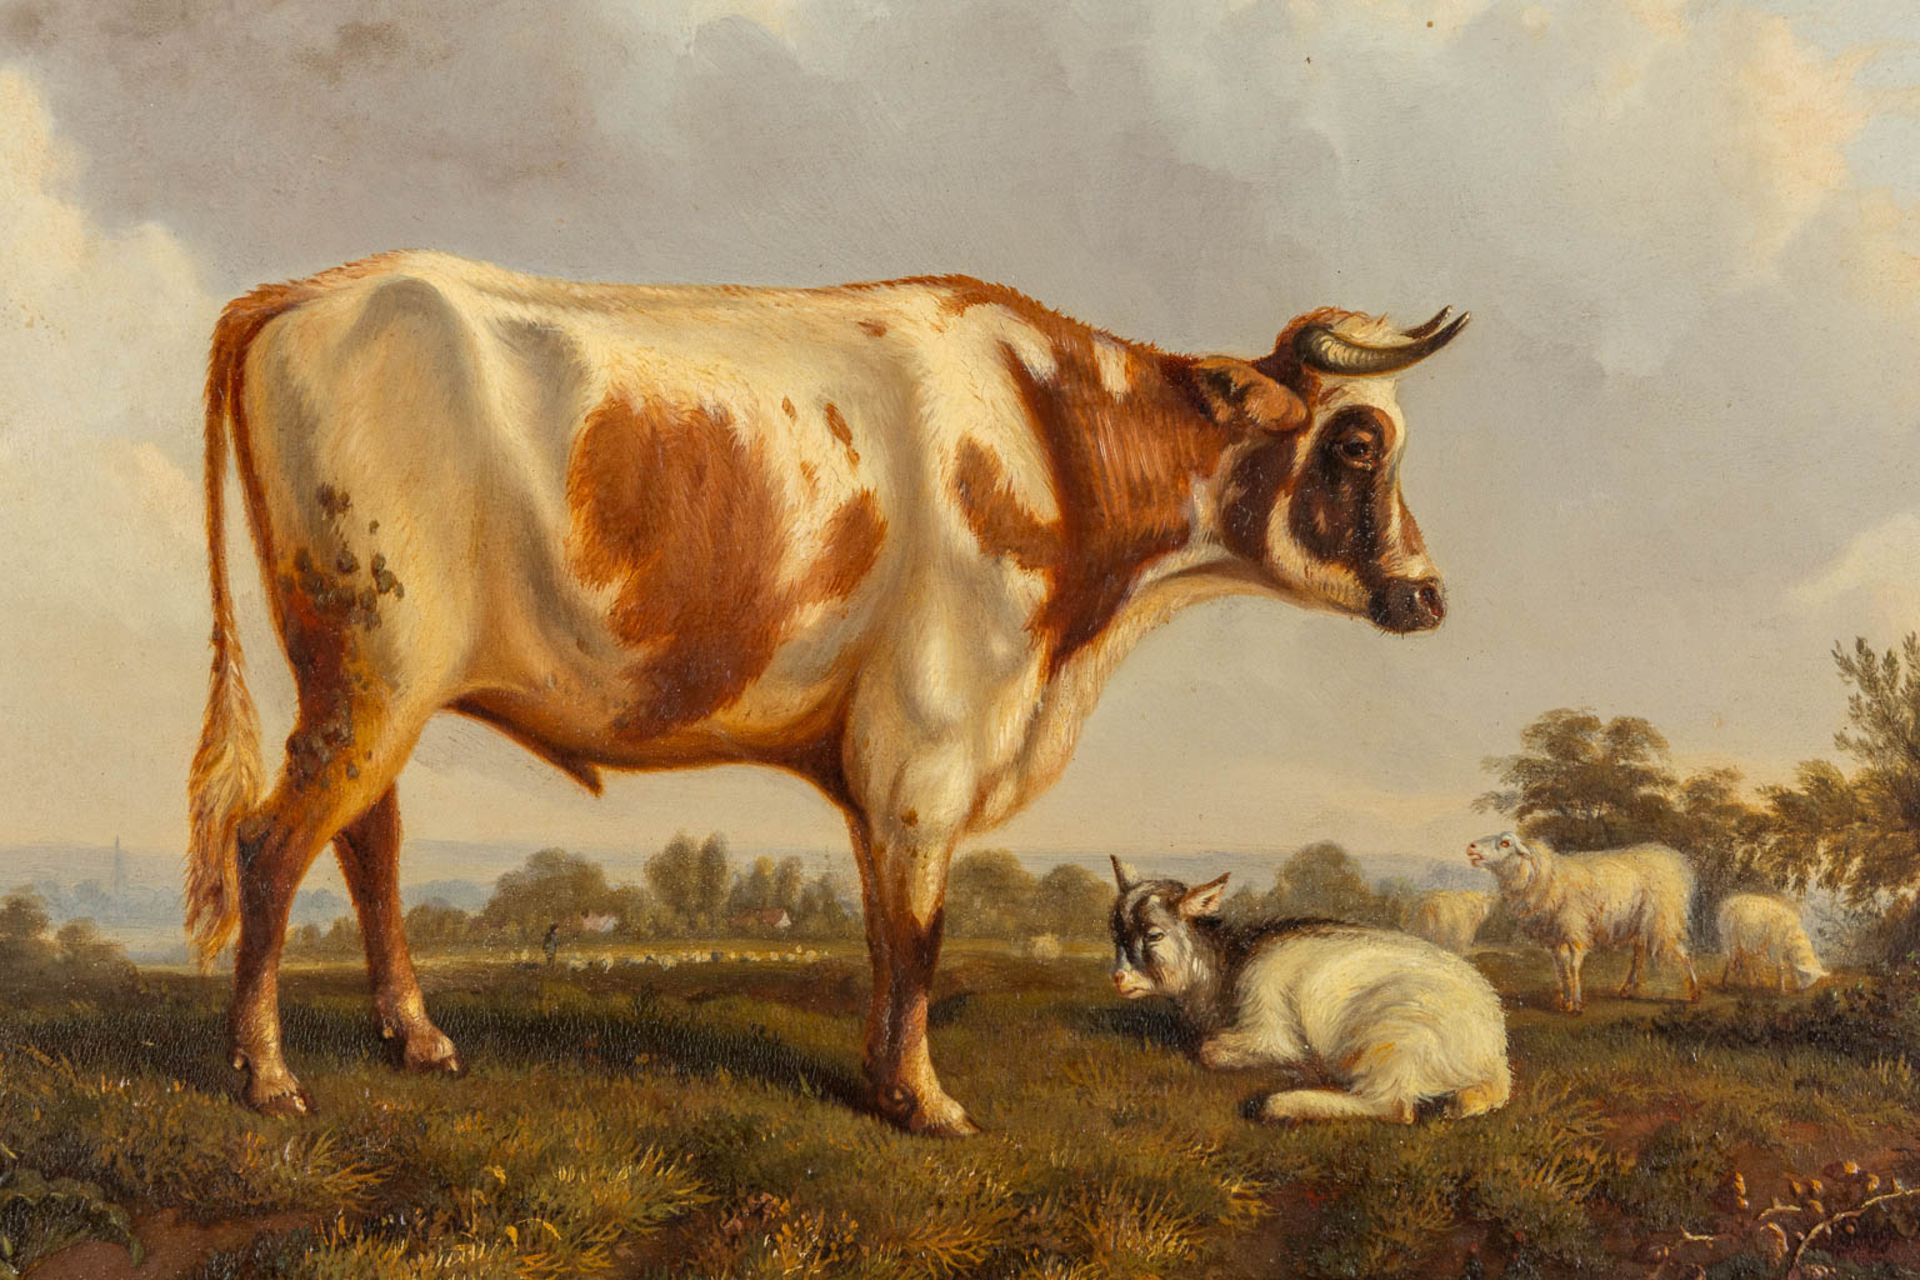 J. VOJAVE (XIX) 'Cow and sheep' oil on a mahogany panel. 1851. (W:40 x H:30,5 cm) - Image 4 of 9